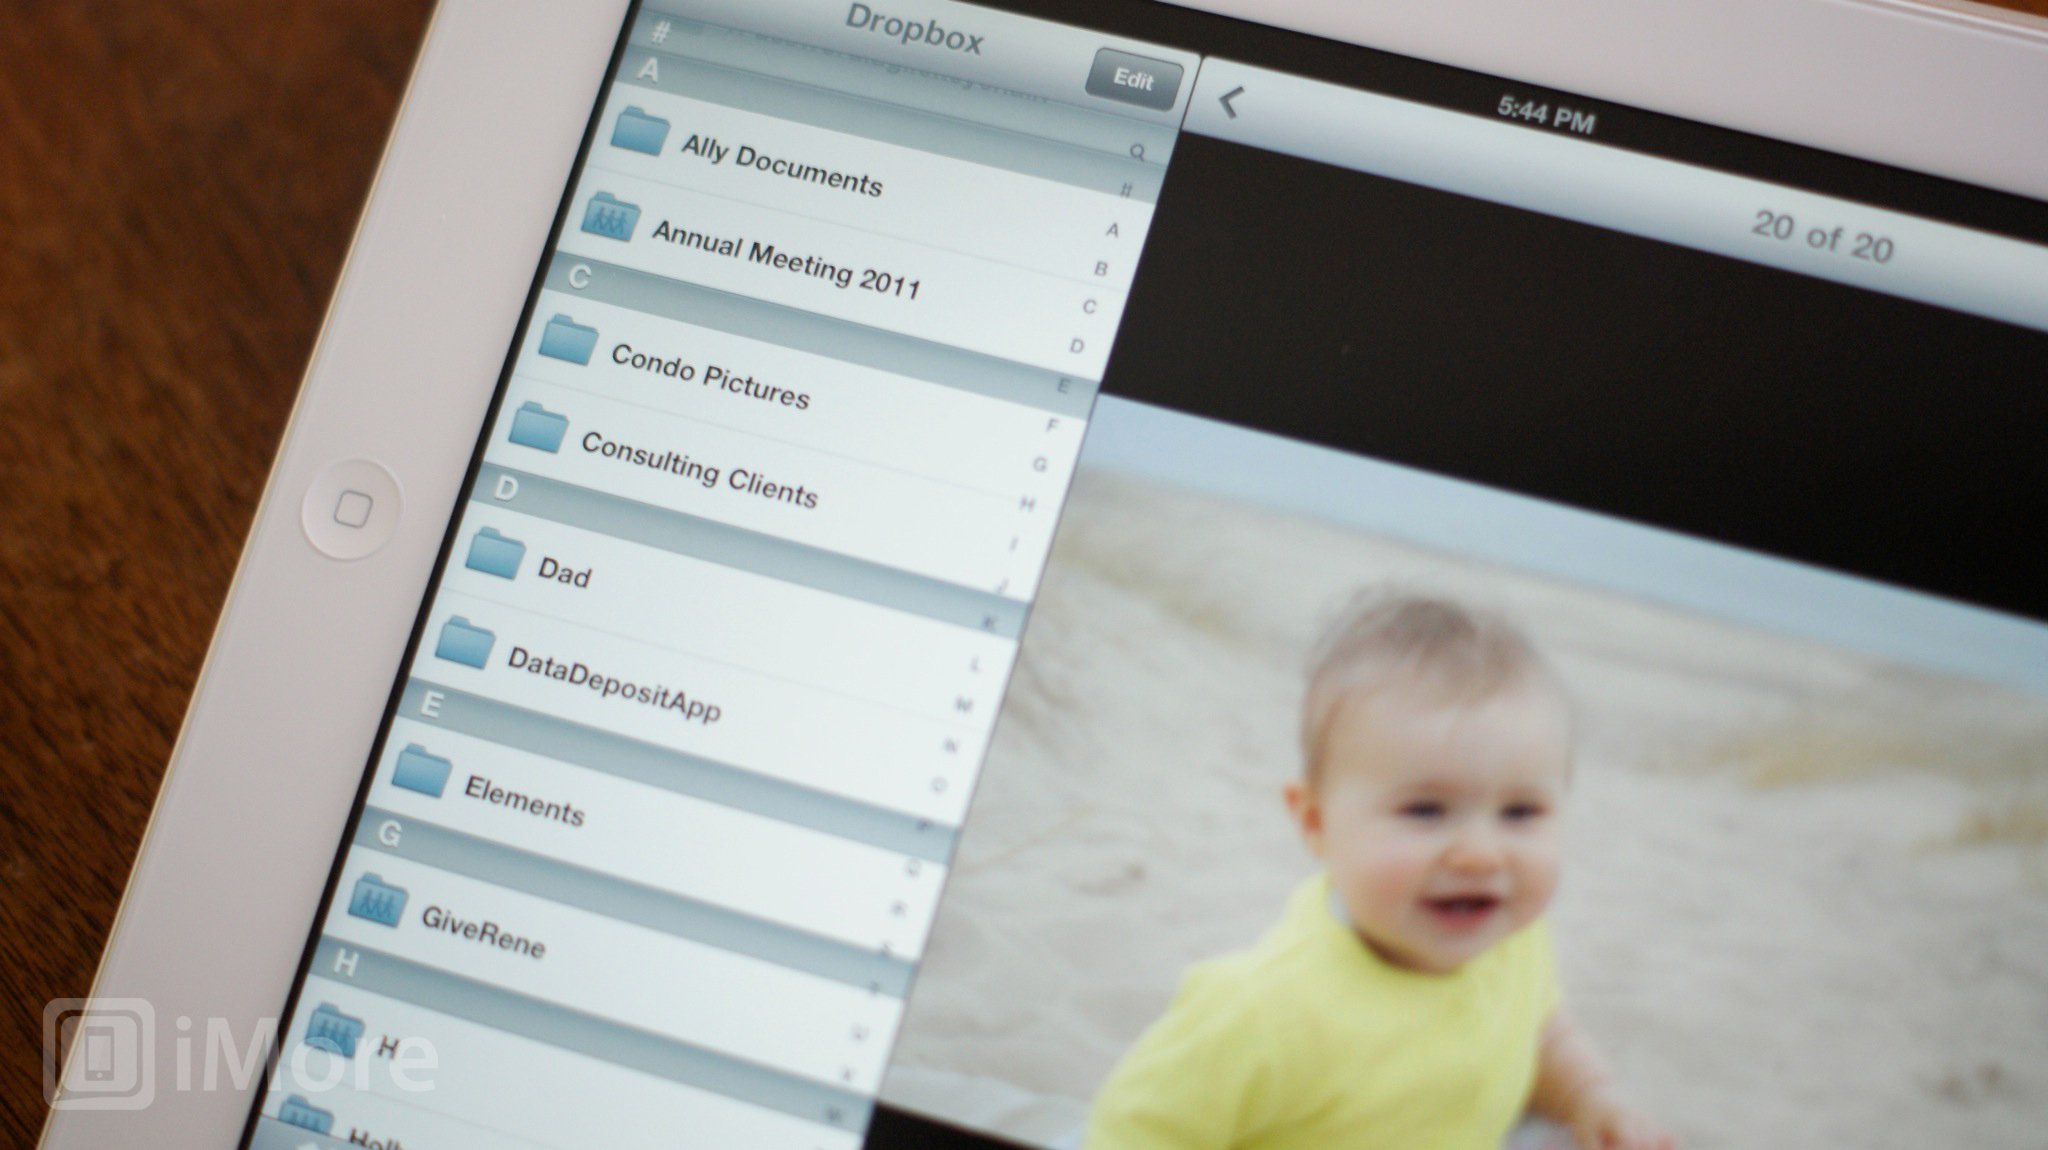 How to access your Dropbox from your new iPad